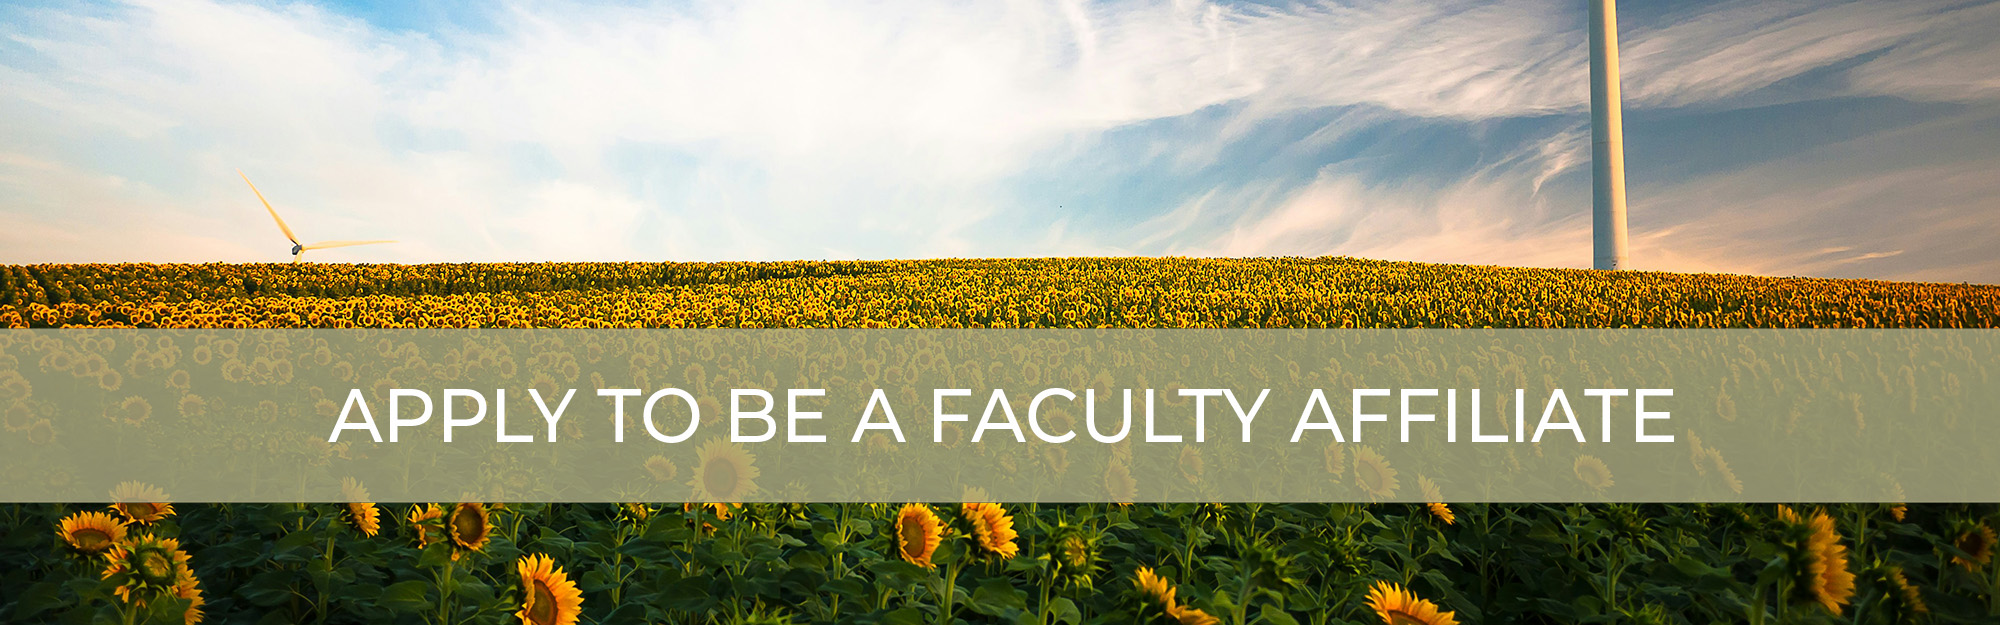 Apply to be Faculty Affiliate